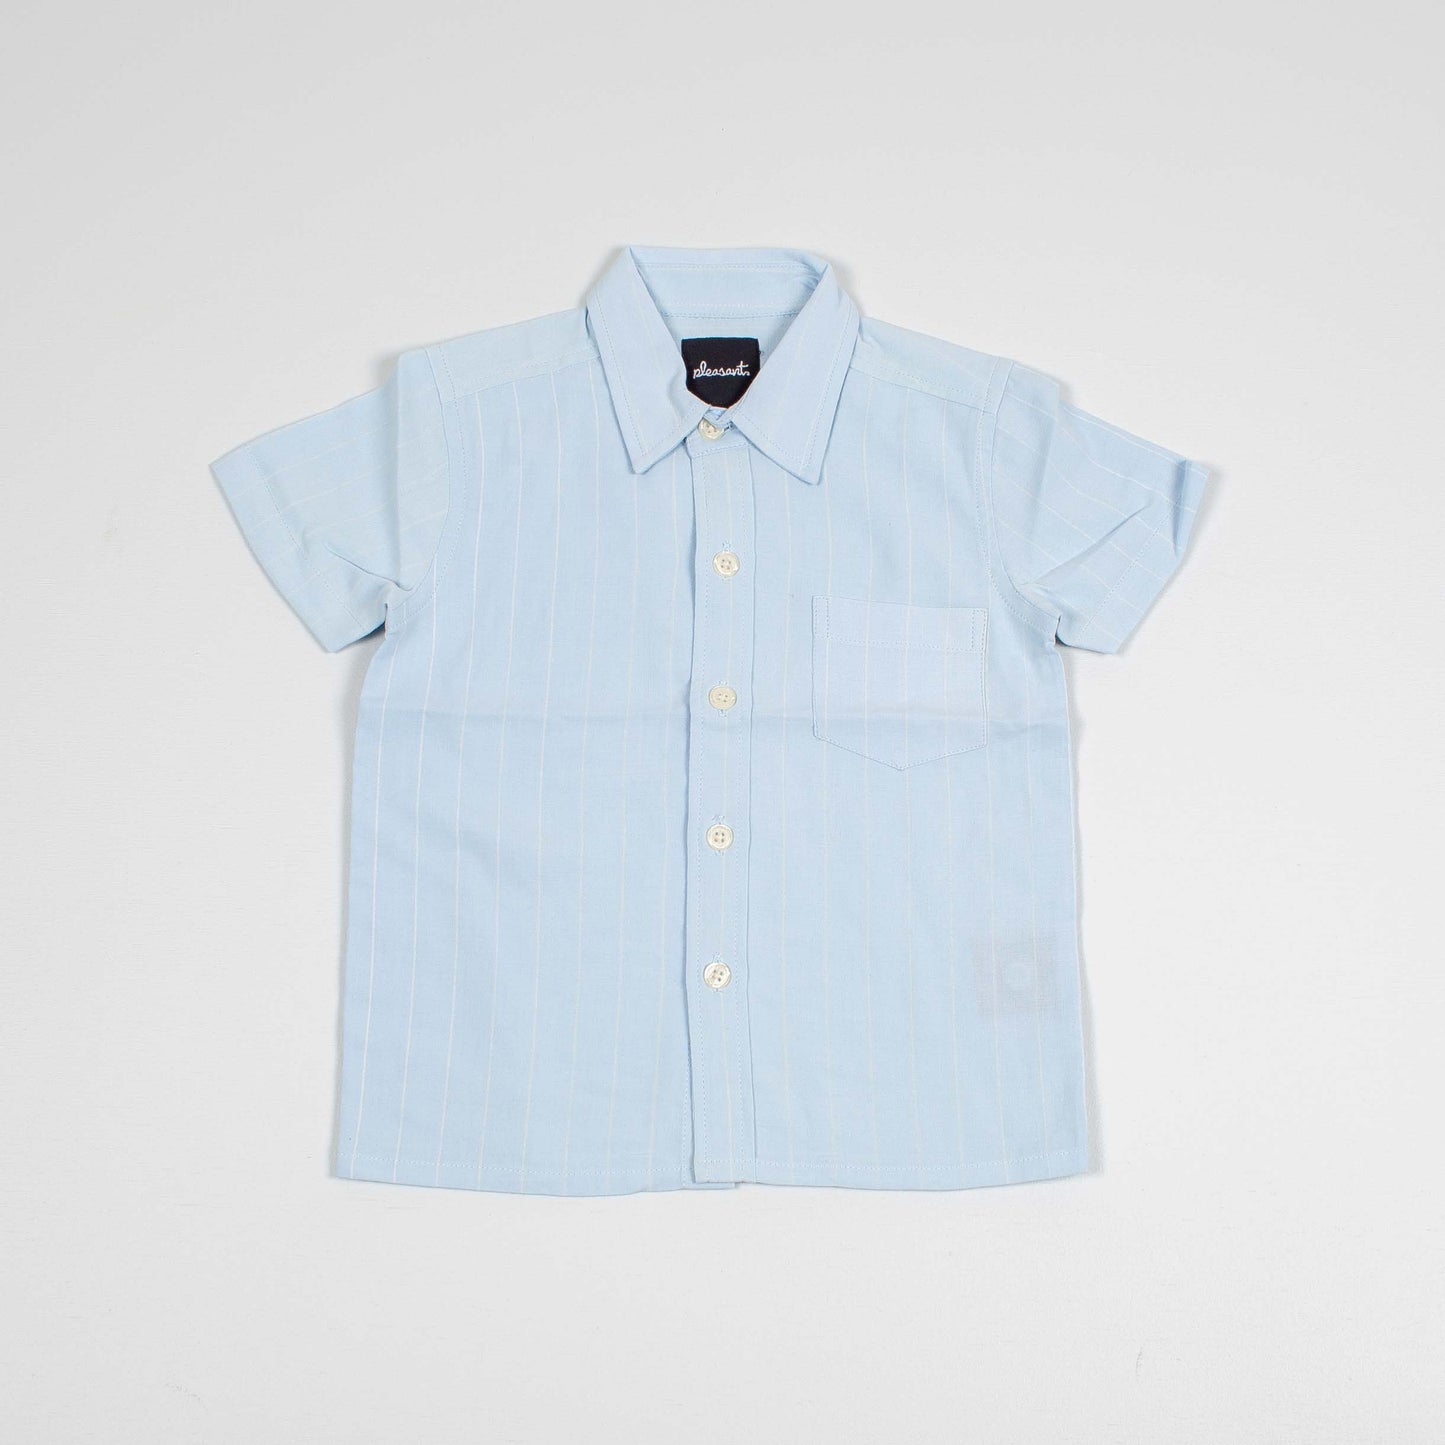 Light blue pin striped upcycled baby shirt